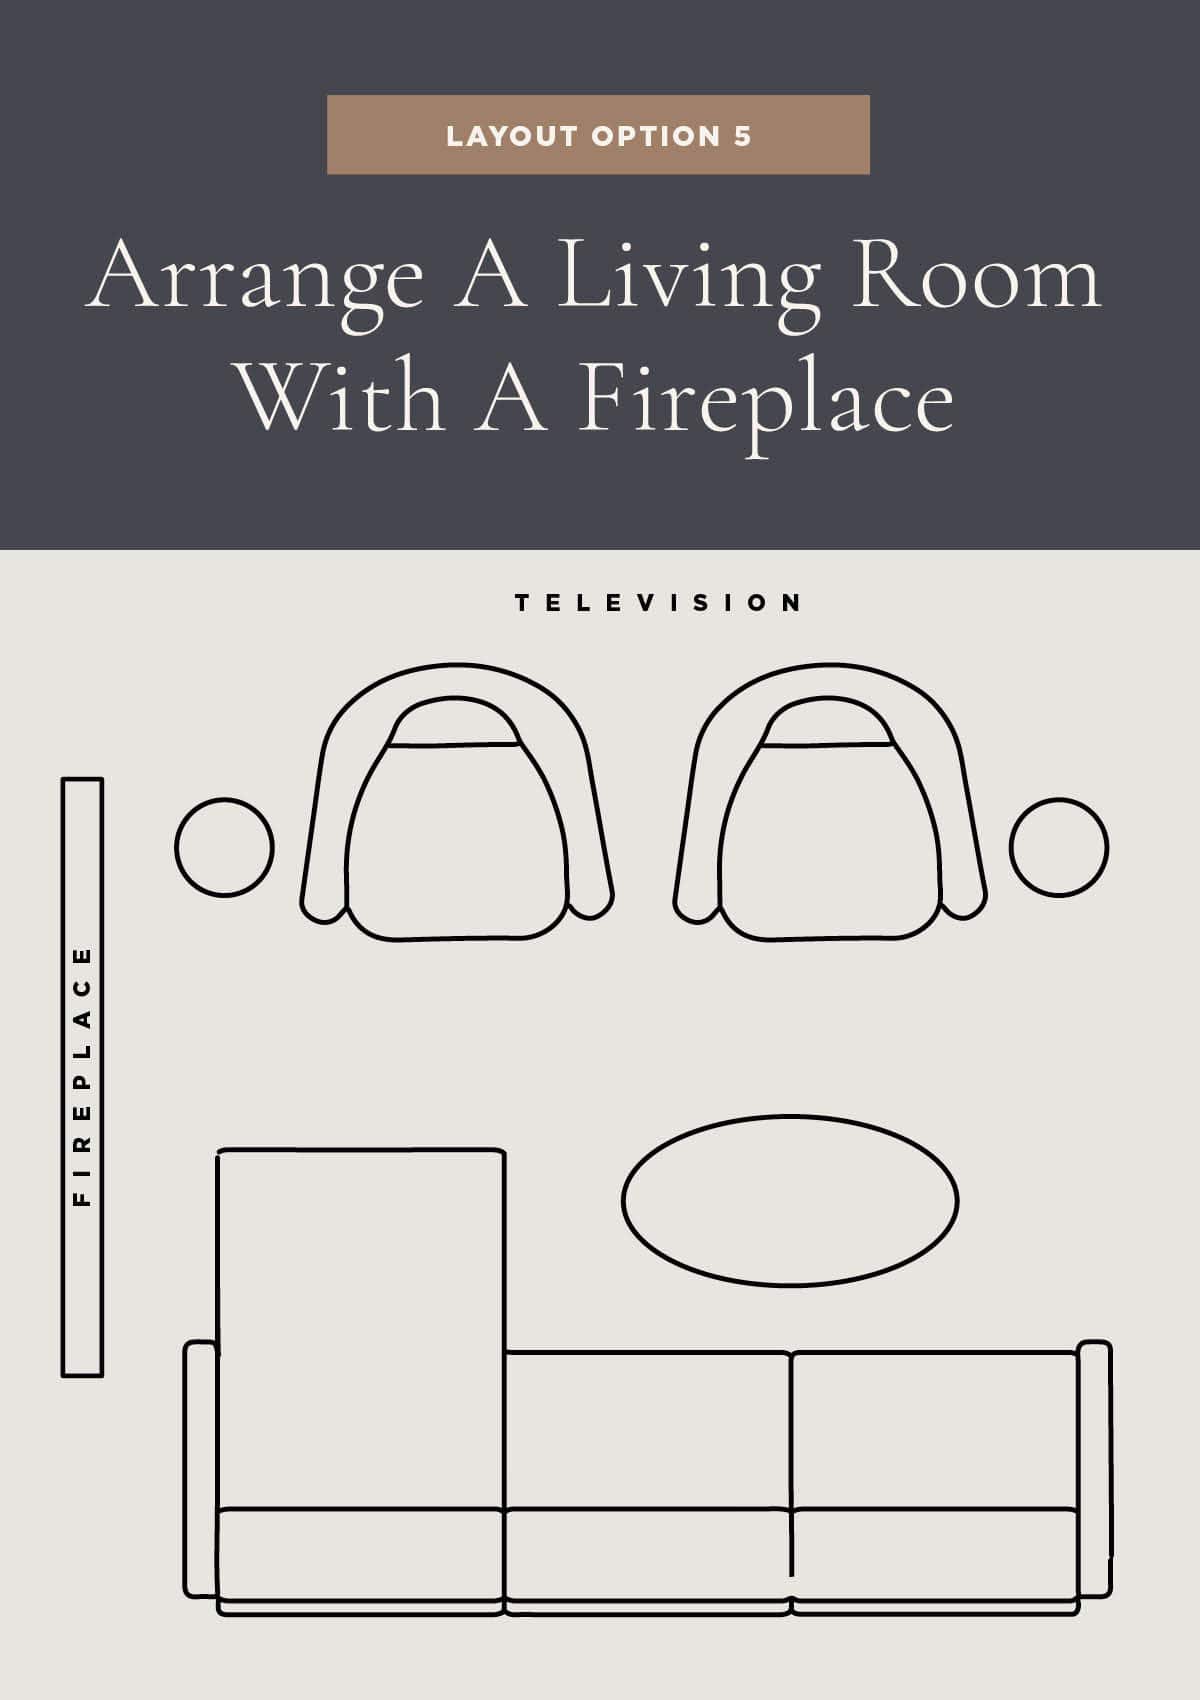 How To Arrange A Living Room With Fireplace and TV On Opposite Wall - Try these 5 living room layout options with helpful design tips to help you keep the fireplace as a focal point yet still enjoy the television.